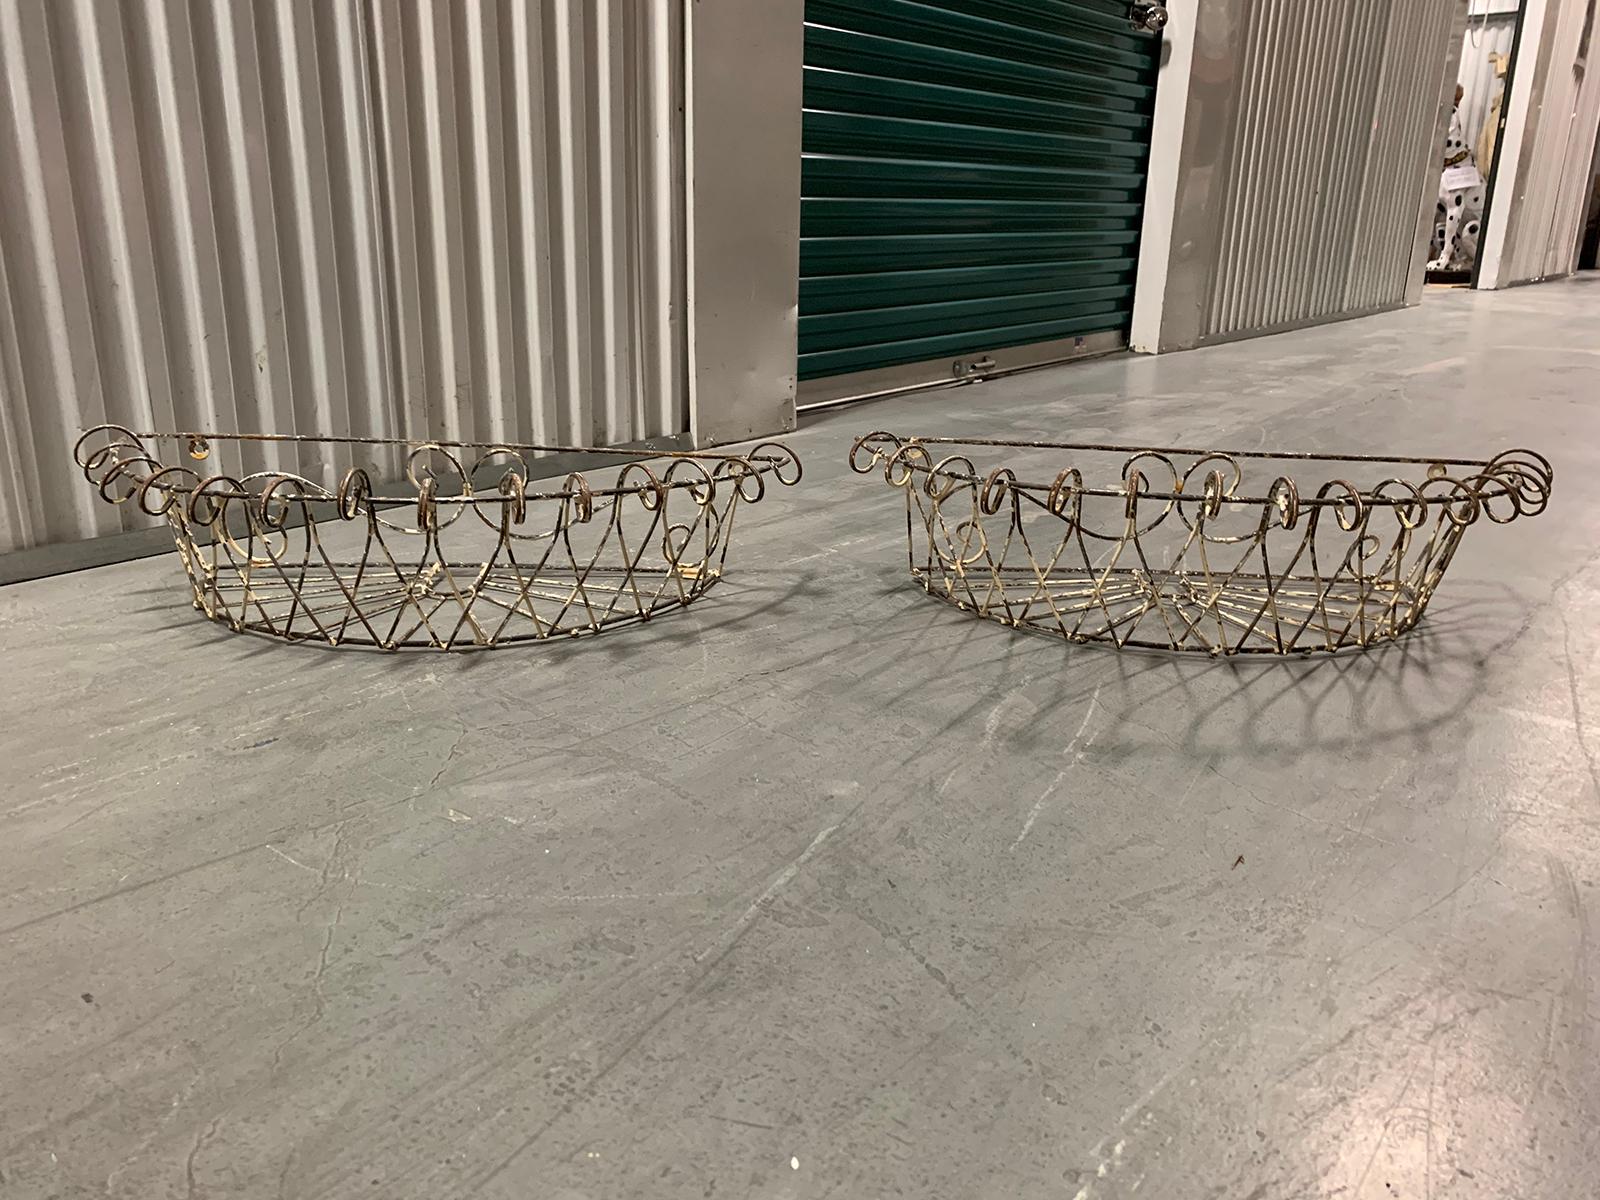 Pair of 20th century French iron wire planters.